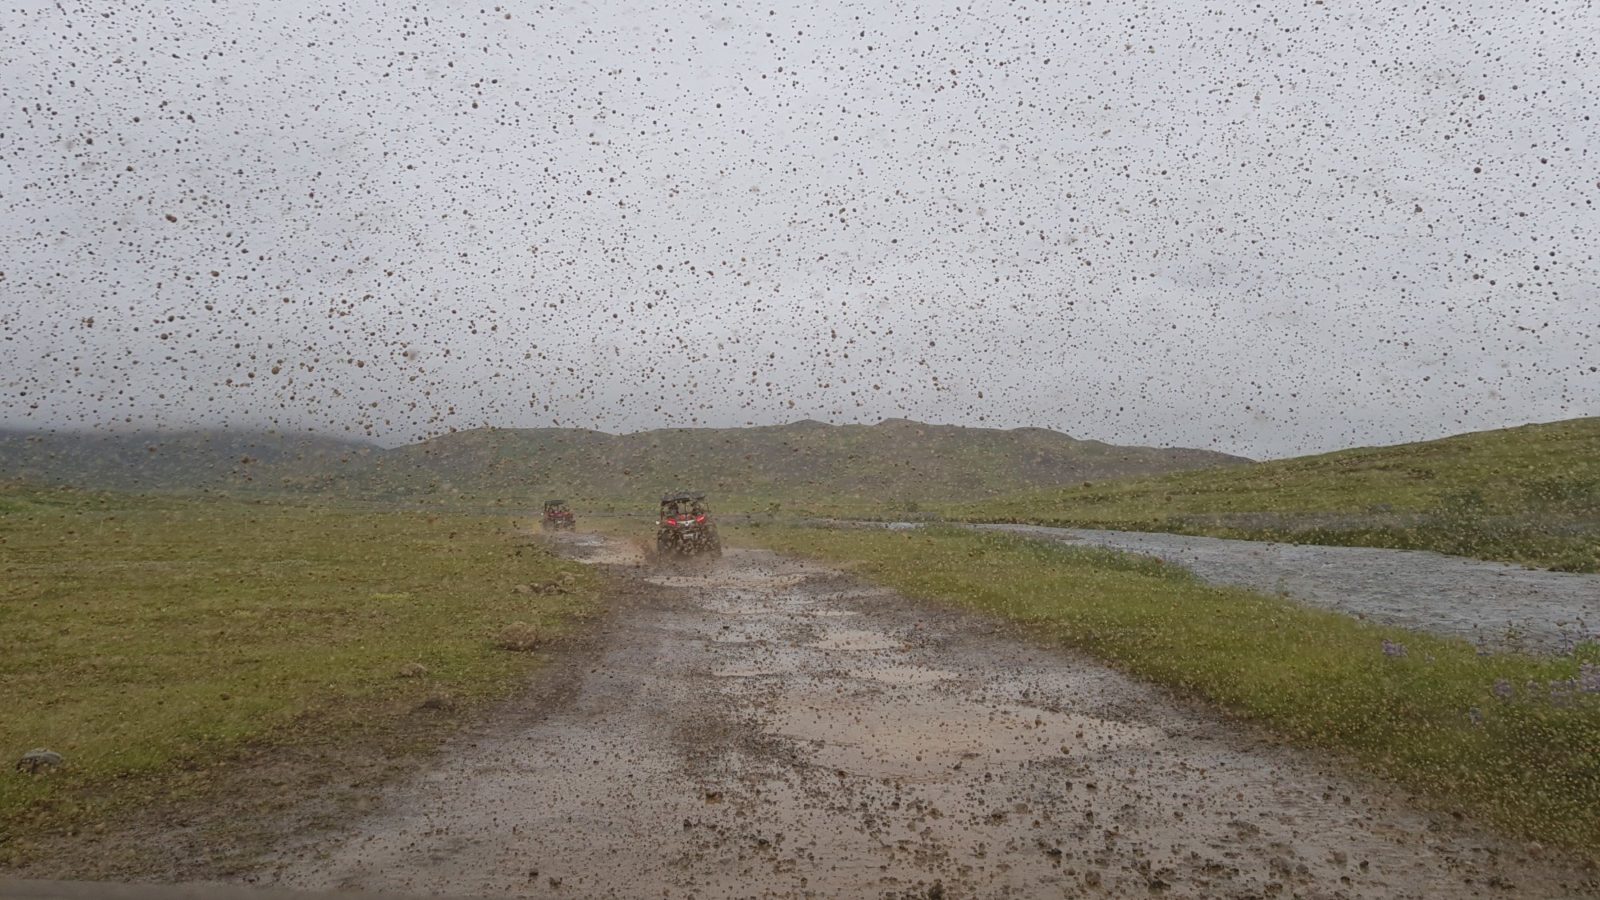 Buggy riding in Iceland.